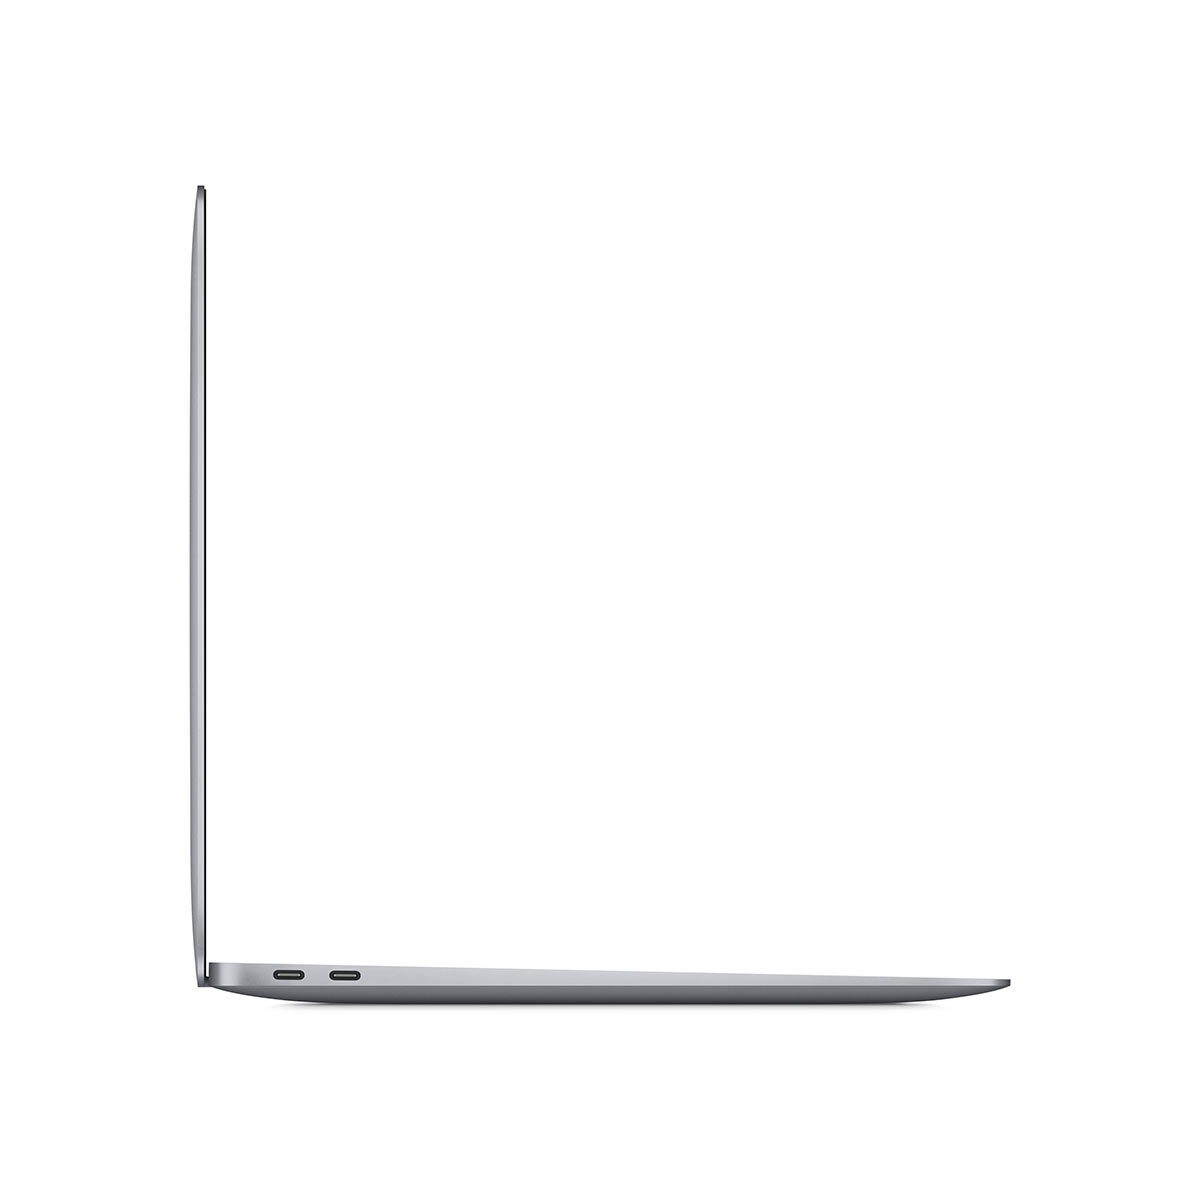 Buy Apple MacBook Air 2020, Apple M1 Chip, 8GB RAM, 256GB SSD, 13.3 Inch in Space Grey, MGN63B/A at costco.co.uk